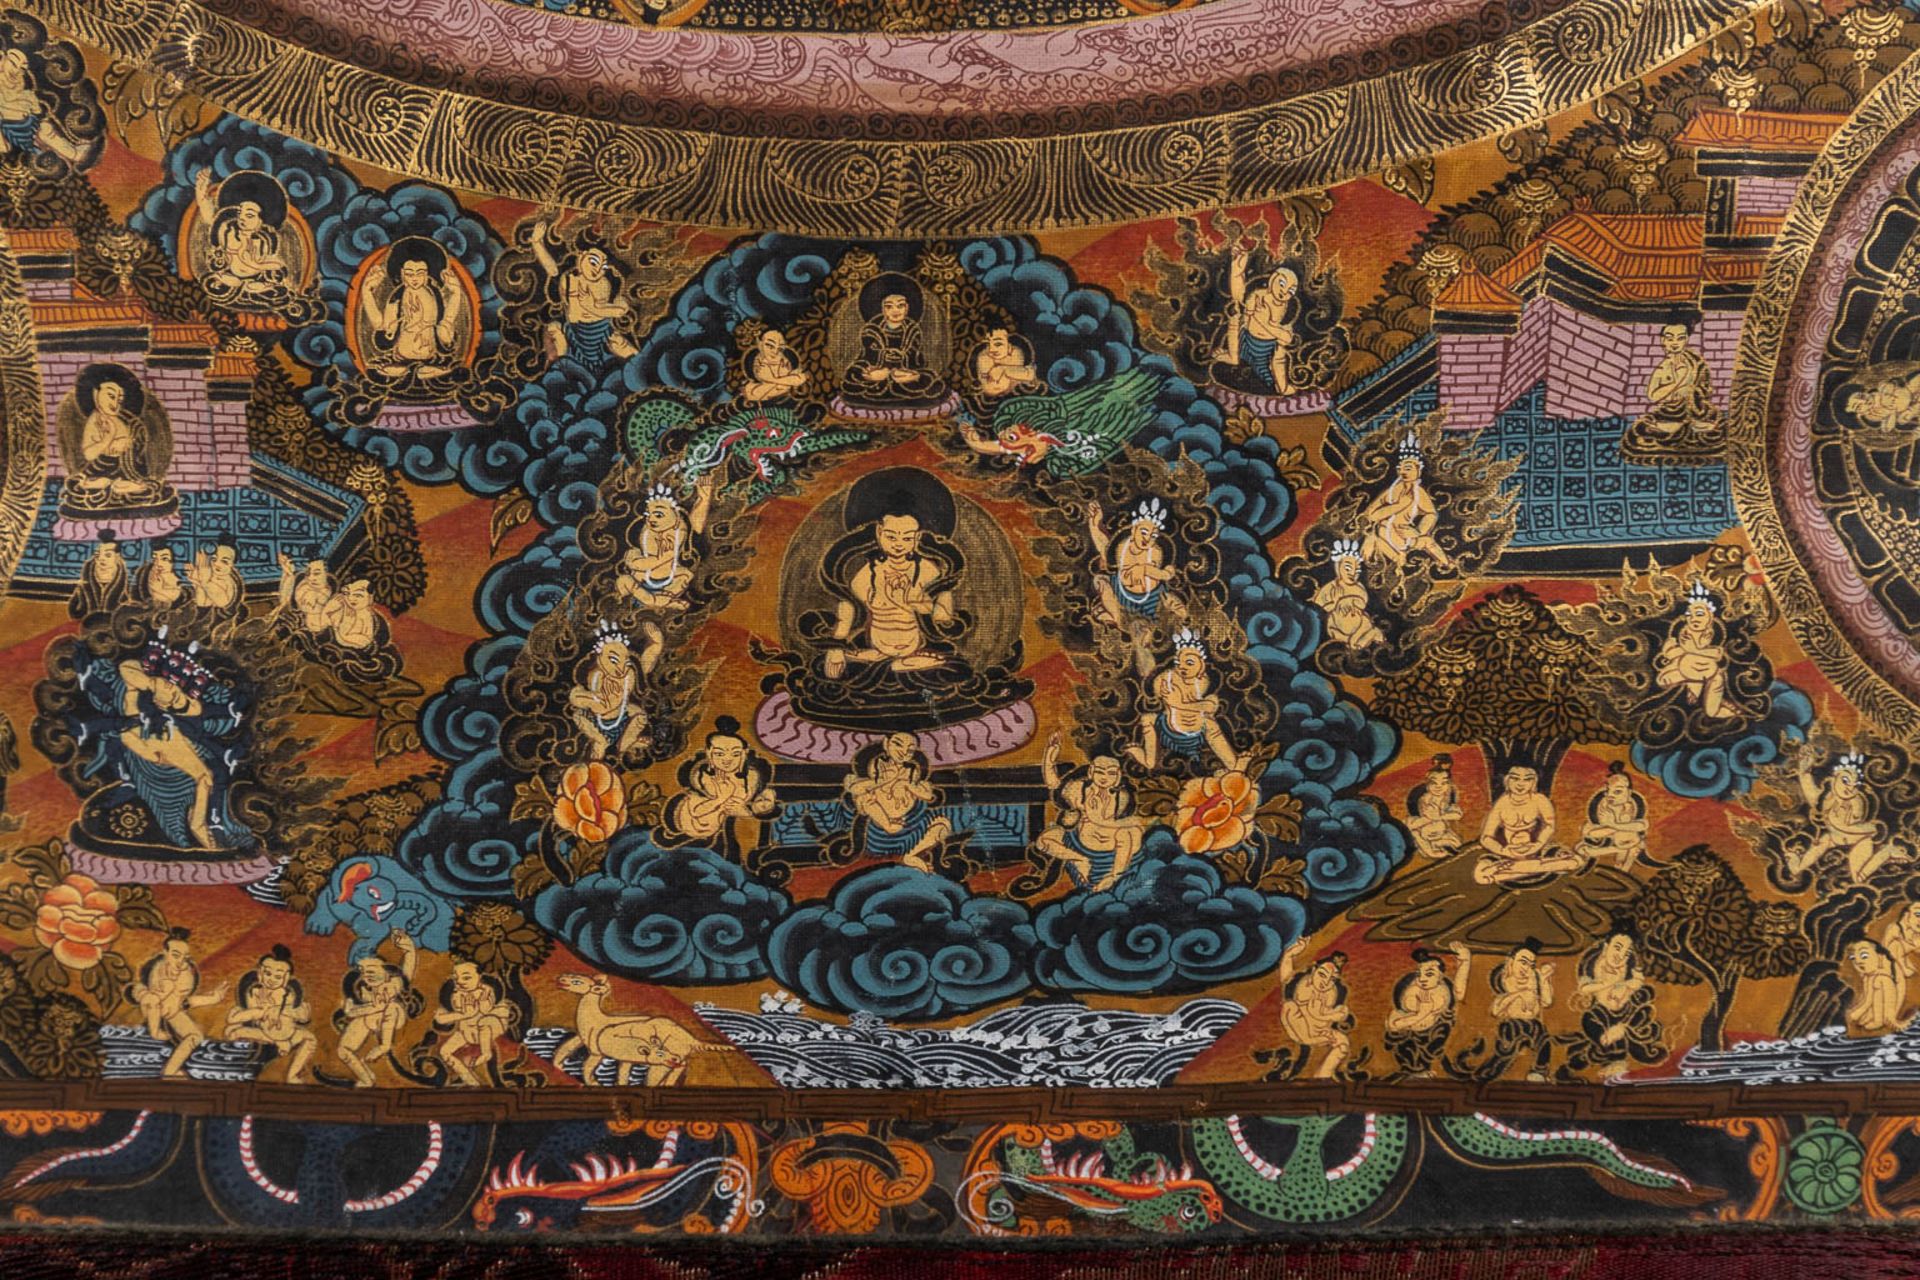 An Eastern Thangka, hand-painted decor on silk. (W:57 x H:74 cm) - Image 8 of 13